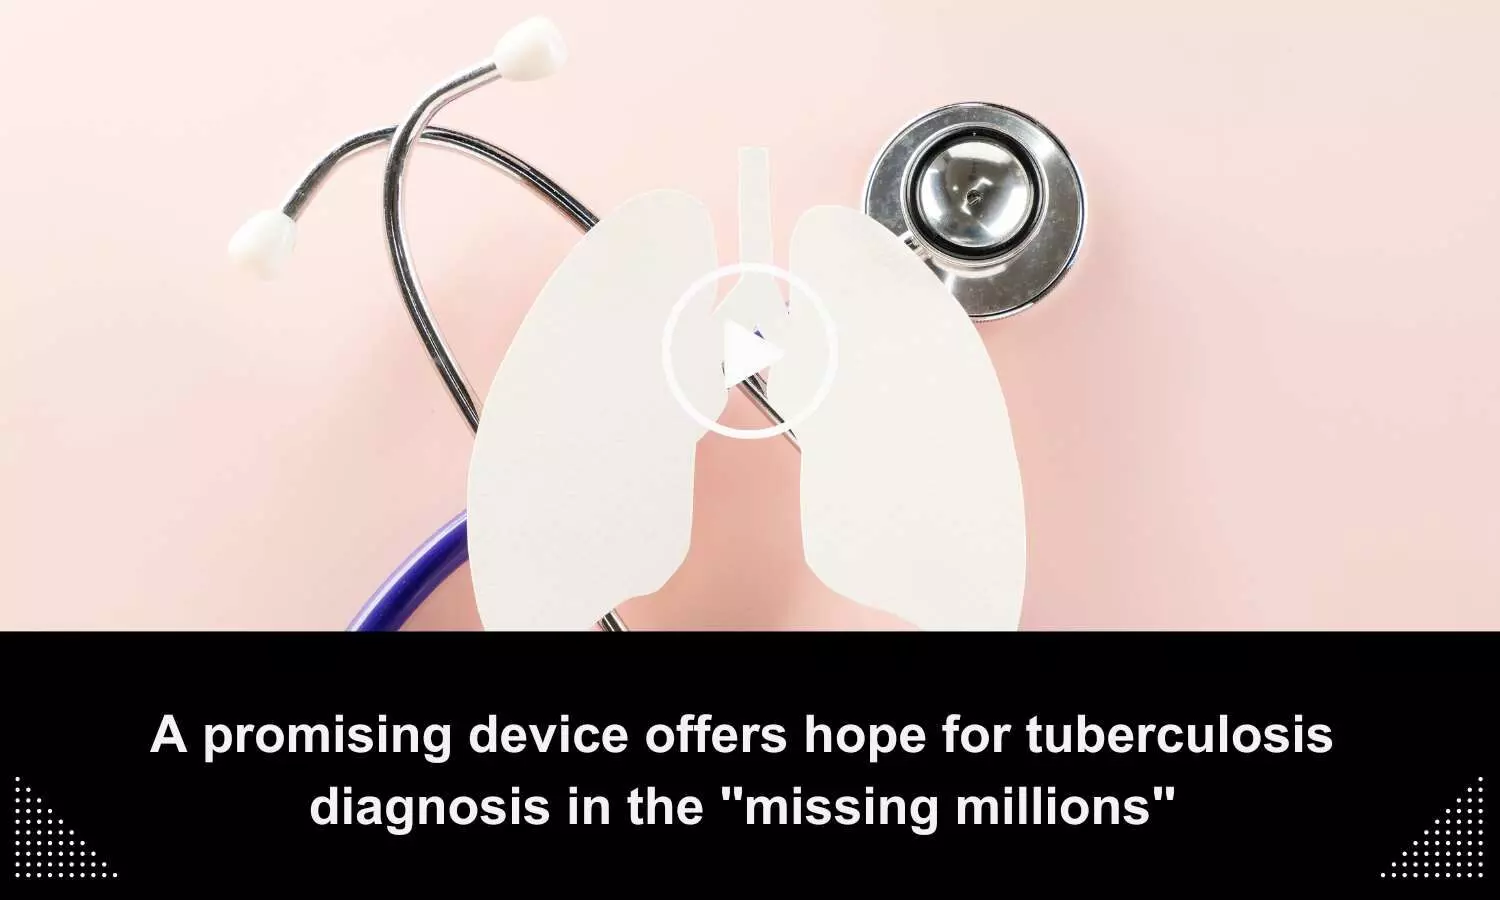 A promising device offers hope for tuberculosis diagnosis in the missing millions